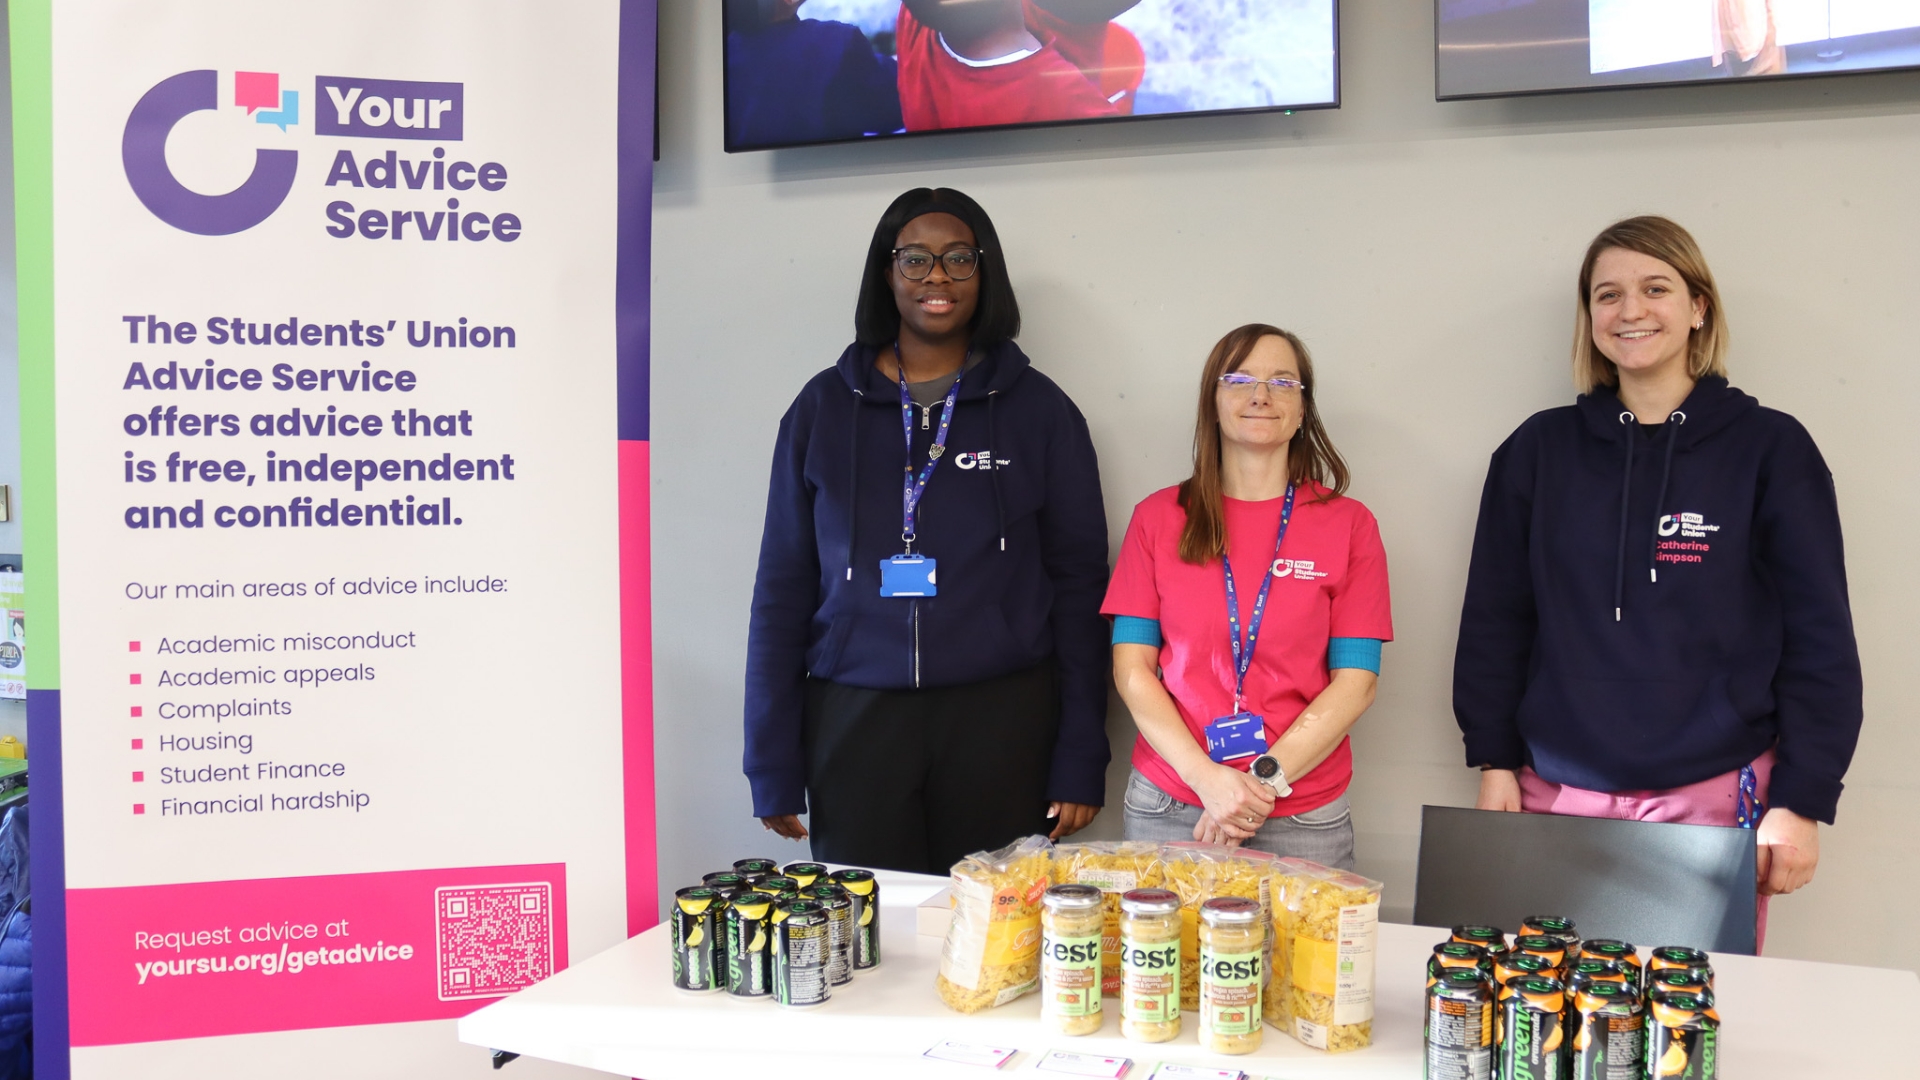 Group of SU staff standing next to a stall and table with food on it